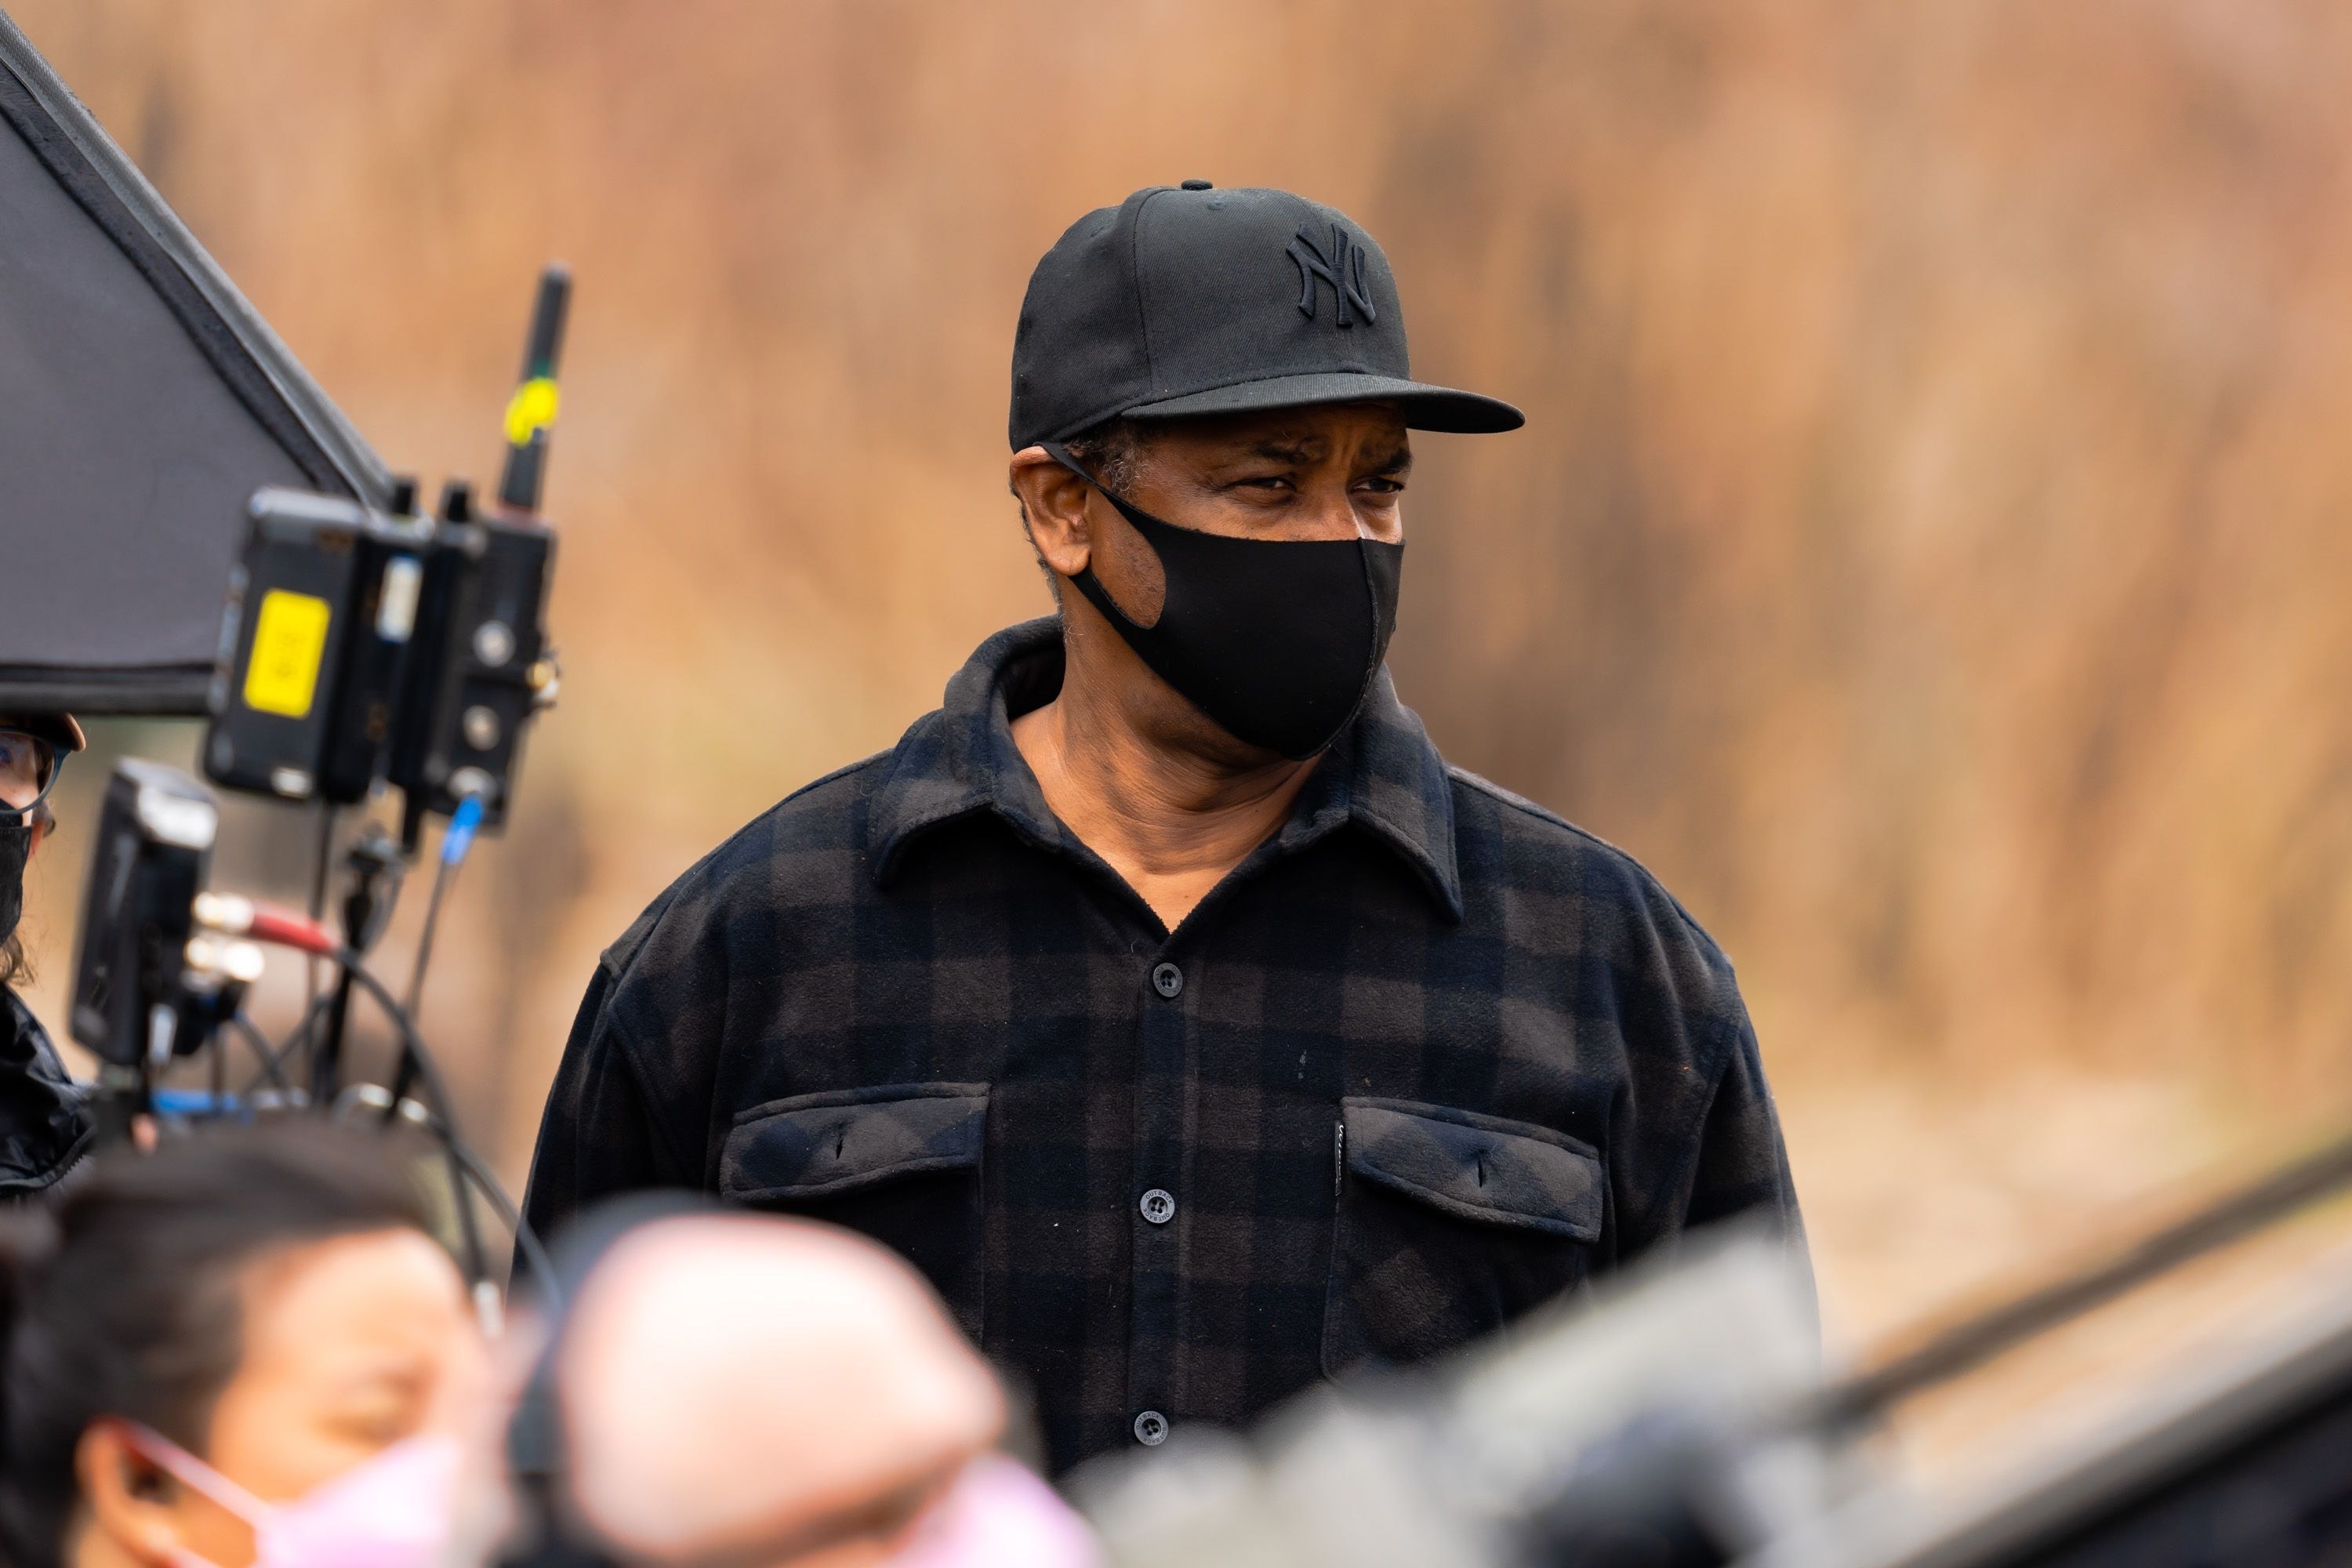 Denzel wearing a face mask and directing